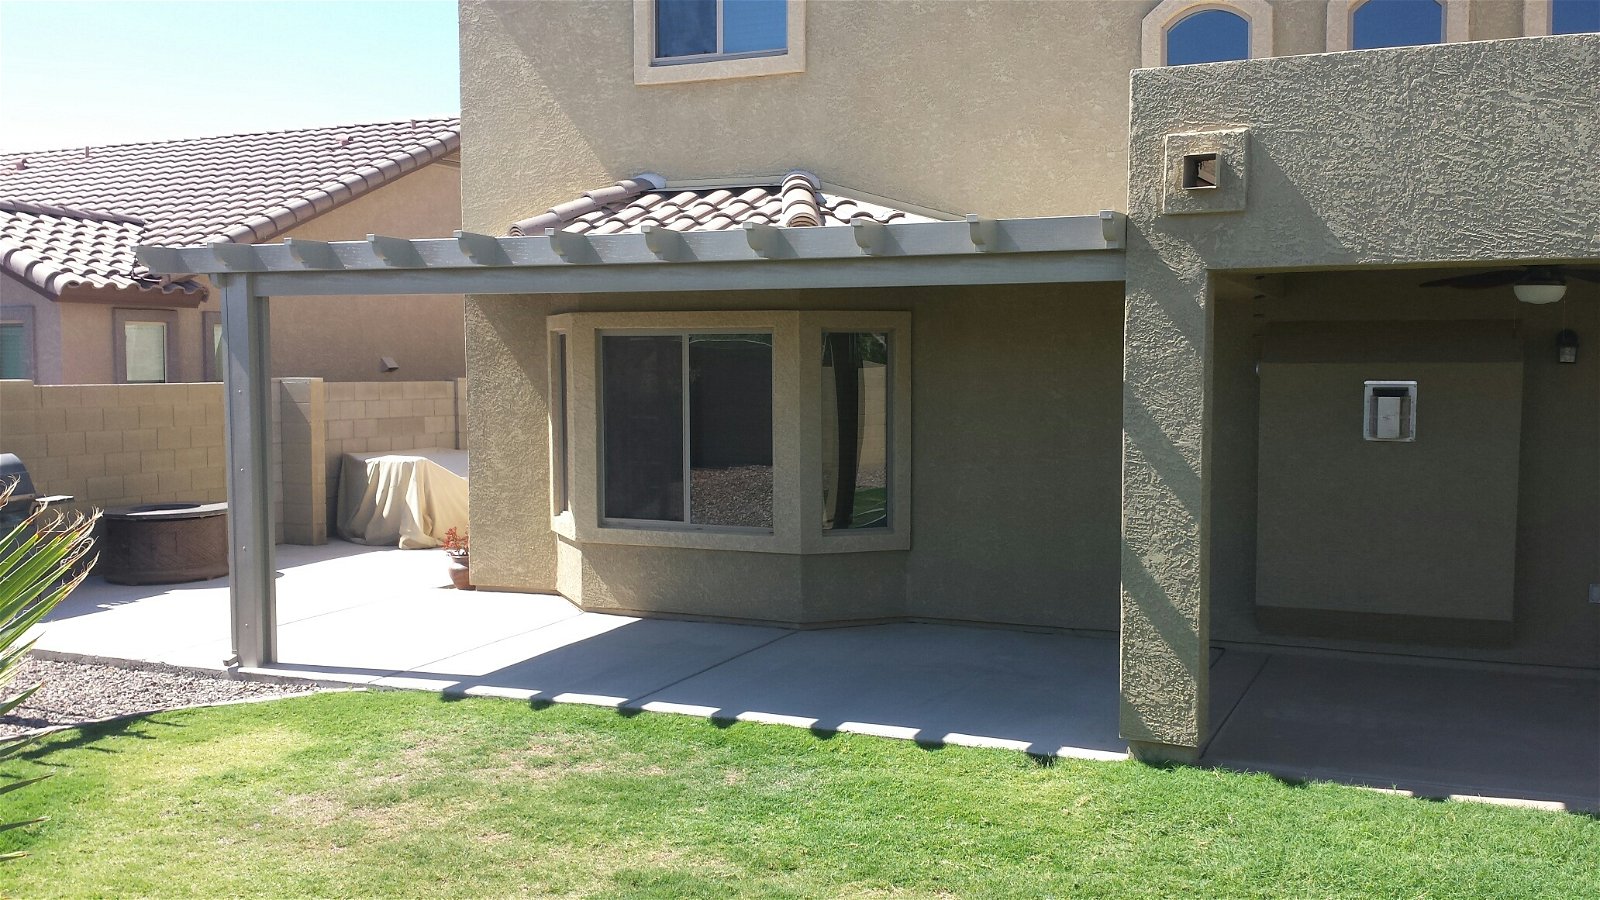 Project Pictures: Alumawood Solid Patio Cover in Mesa, AZ